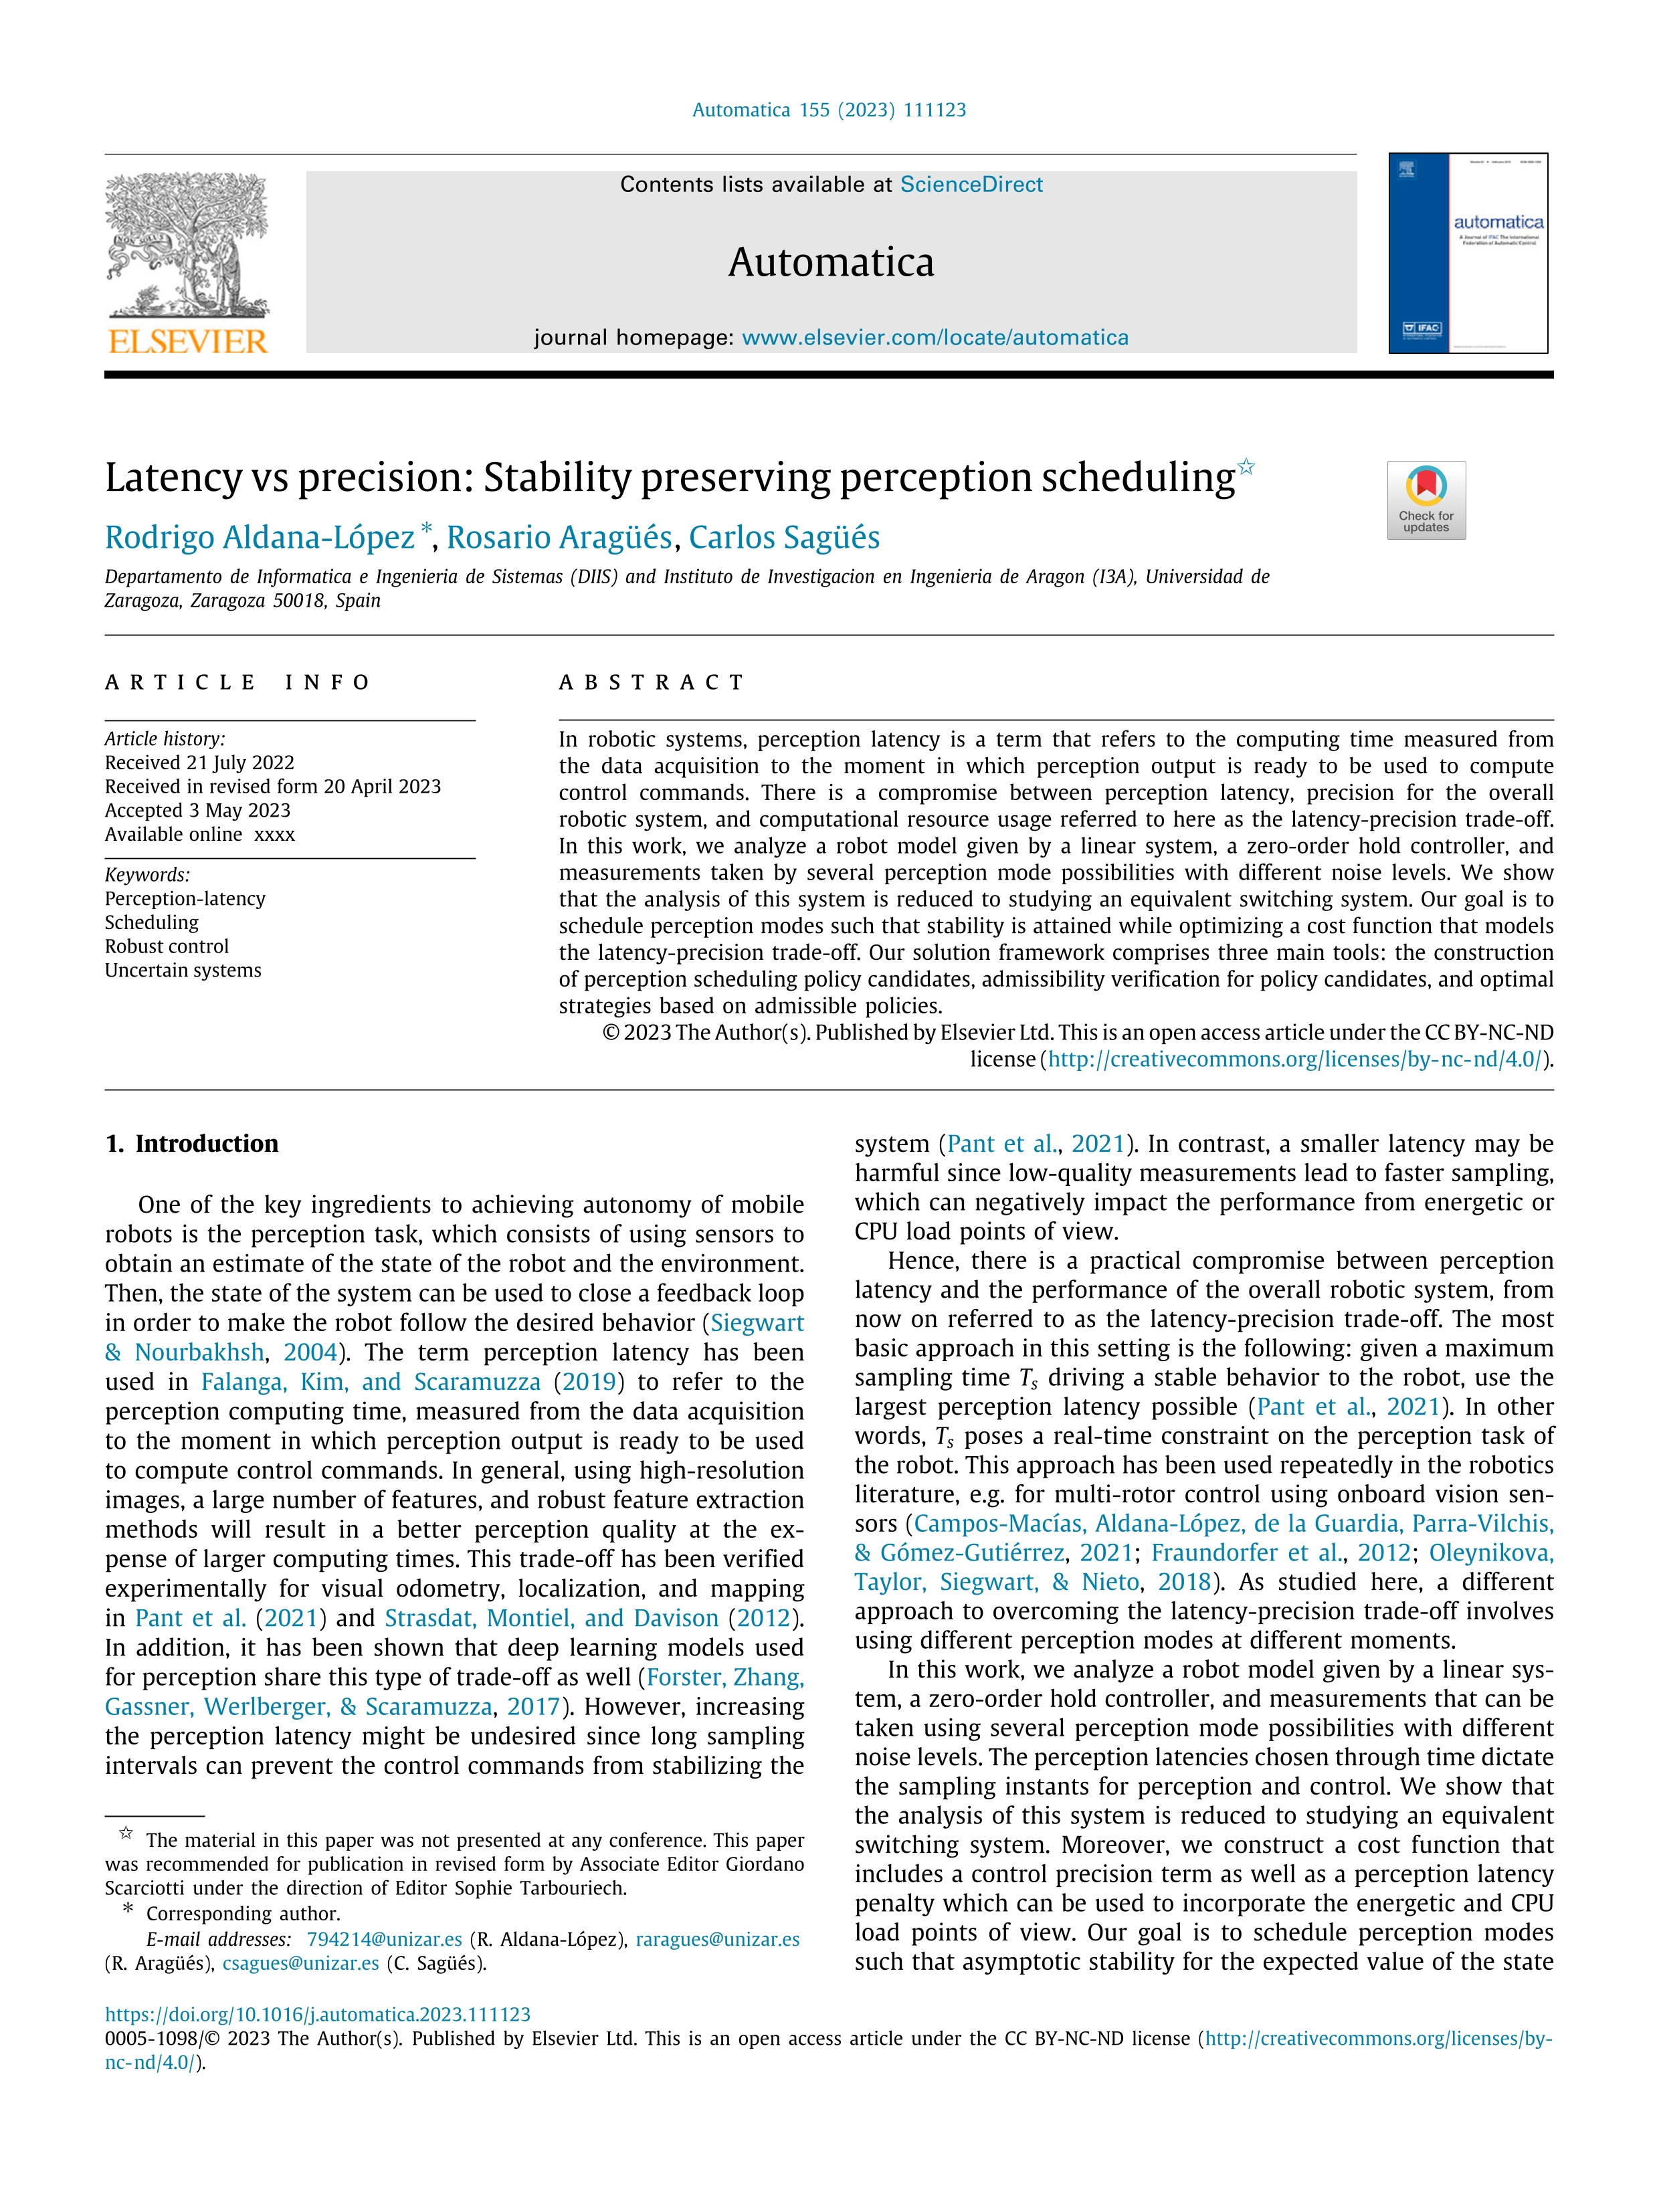 Latency vs precision: Stability preserving perception scheduling